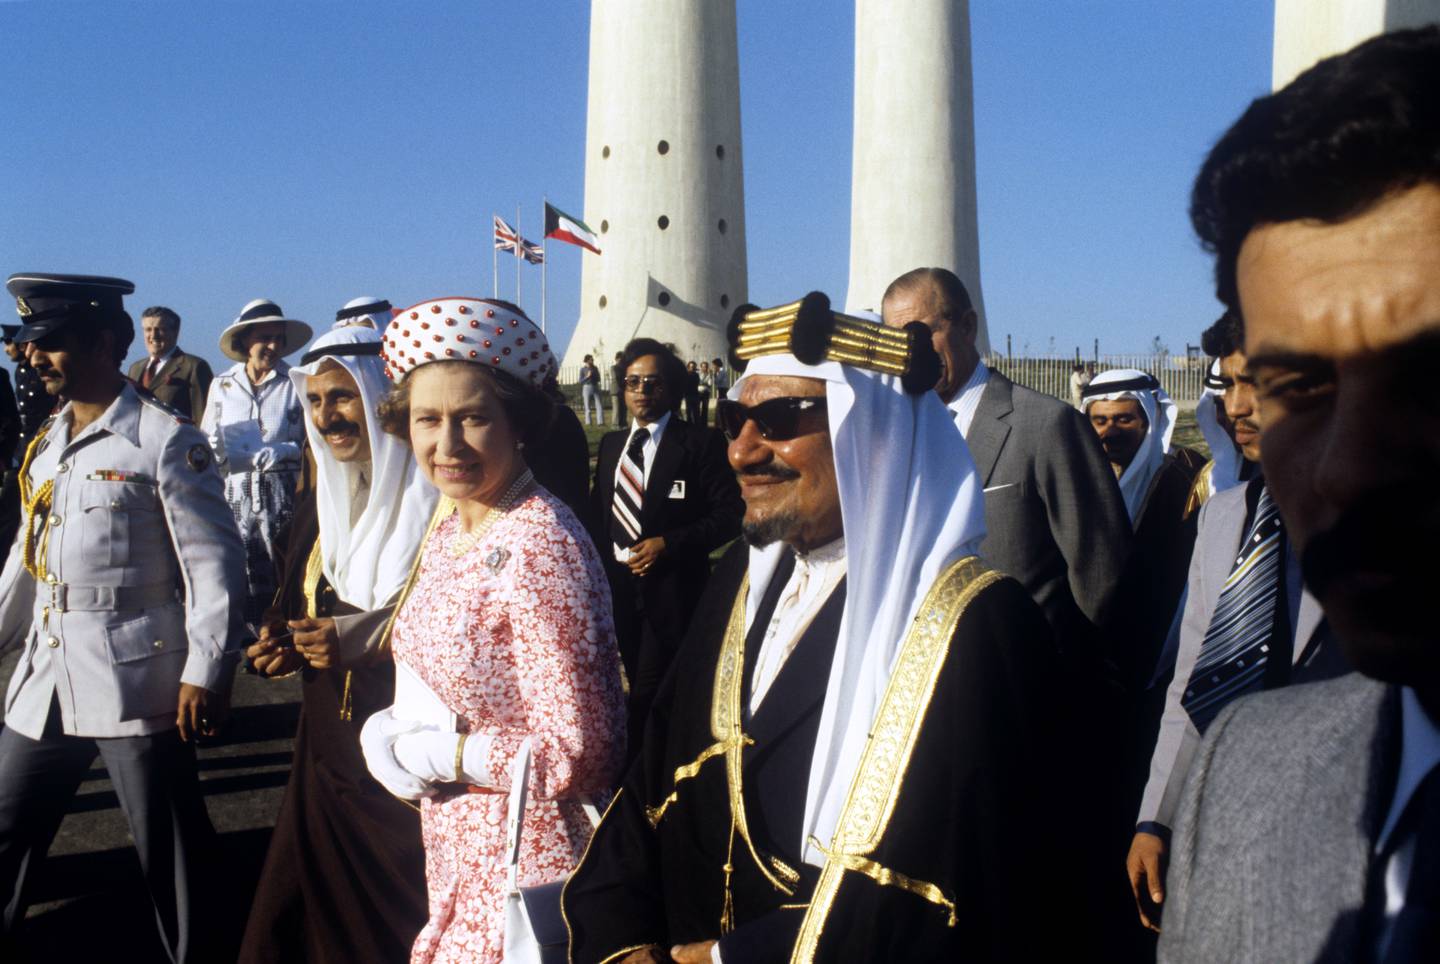 Queen Elizabeth, accompanied by Arab dignitaries, attends a folk dance display in the shadow of Kuwait's water towers. PA Images via Getty Images